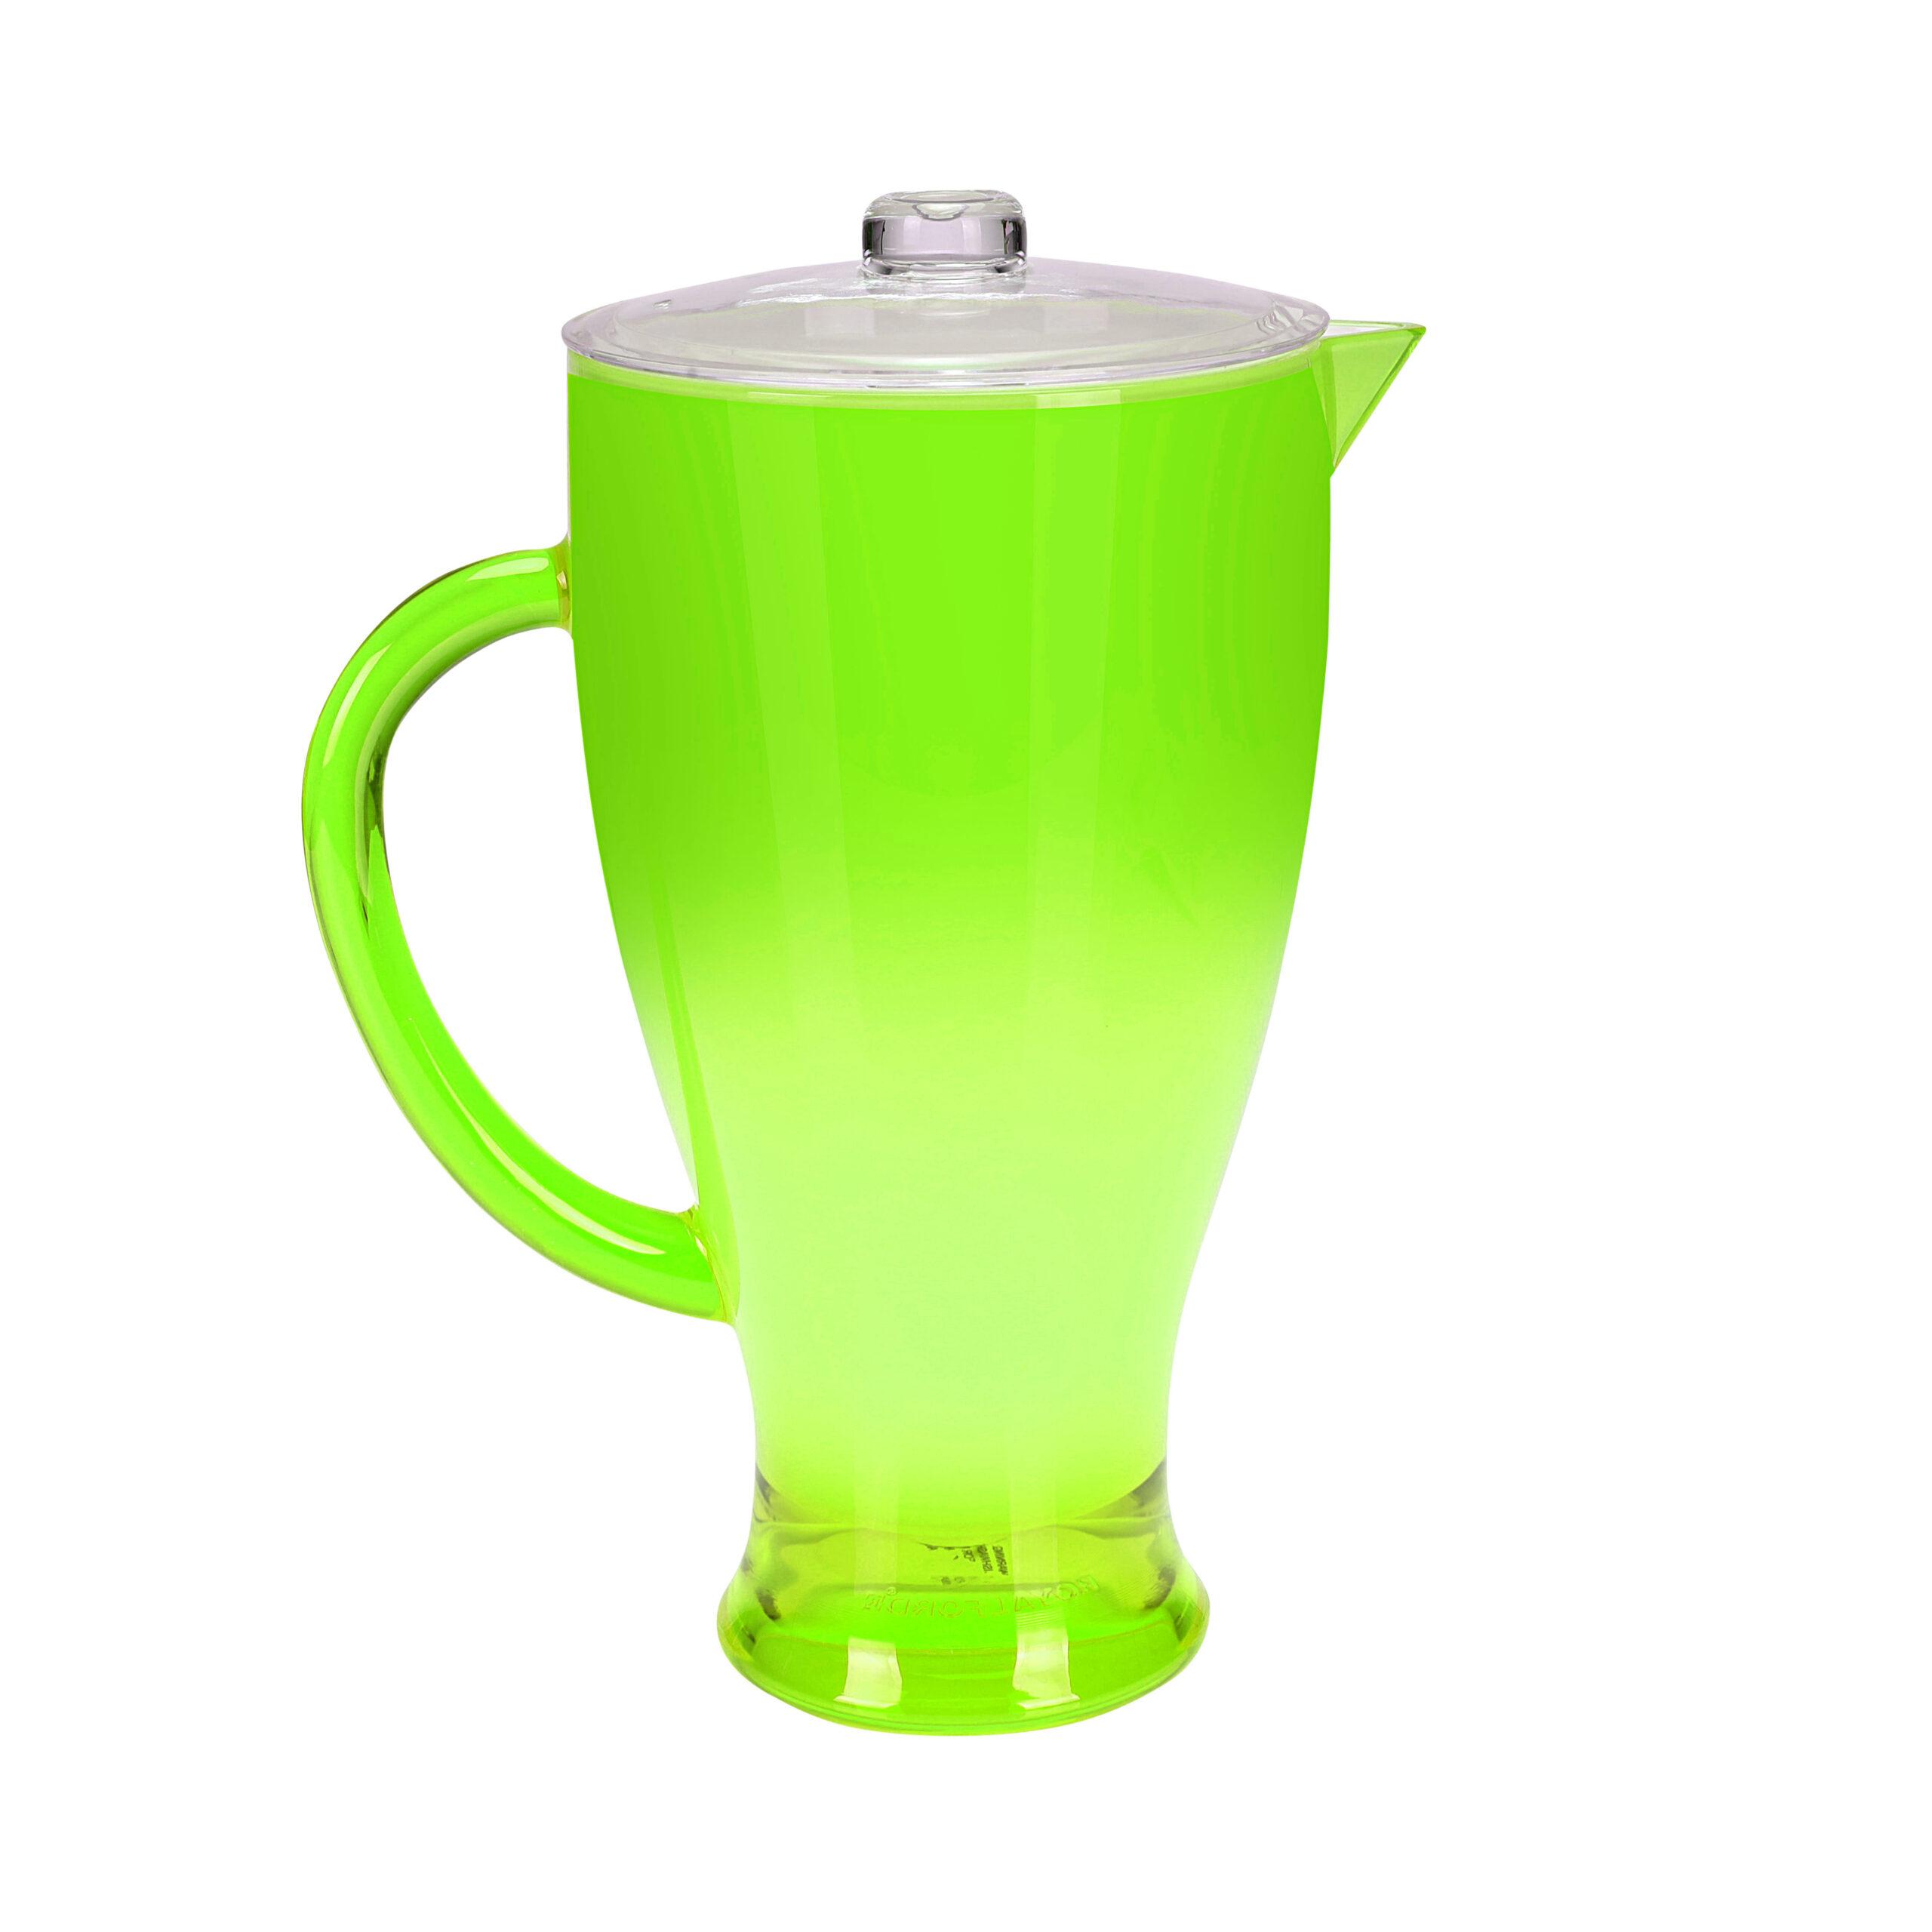 Royalford RF345N 2L Acrylic Jug - Acrylic Plastic Large Drink Jug with Comfortable Handles & Leak Proof Lid | Juice Jug Water Pitcher Juice Cold Tea Milk Bottle Pot Container for Restaurants Home